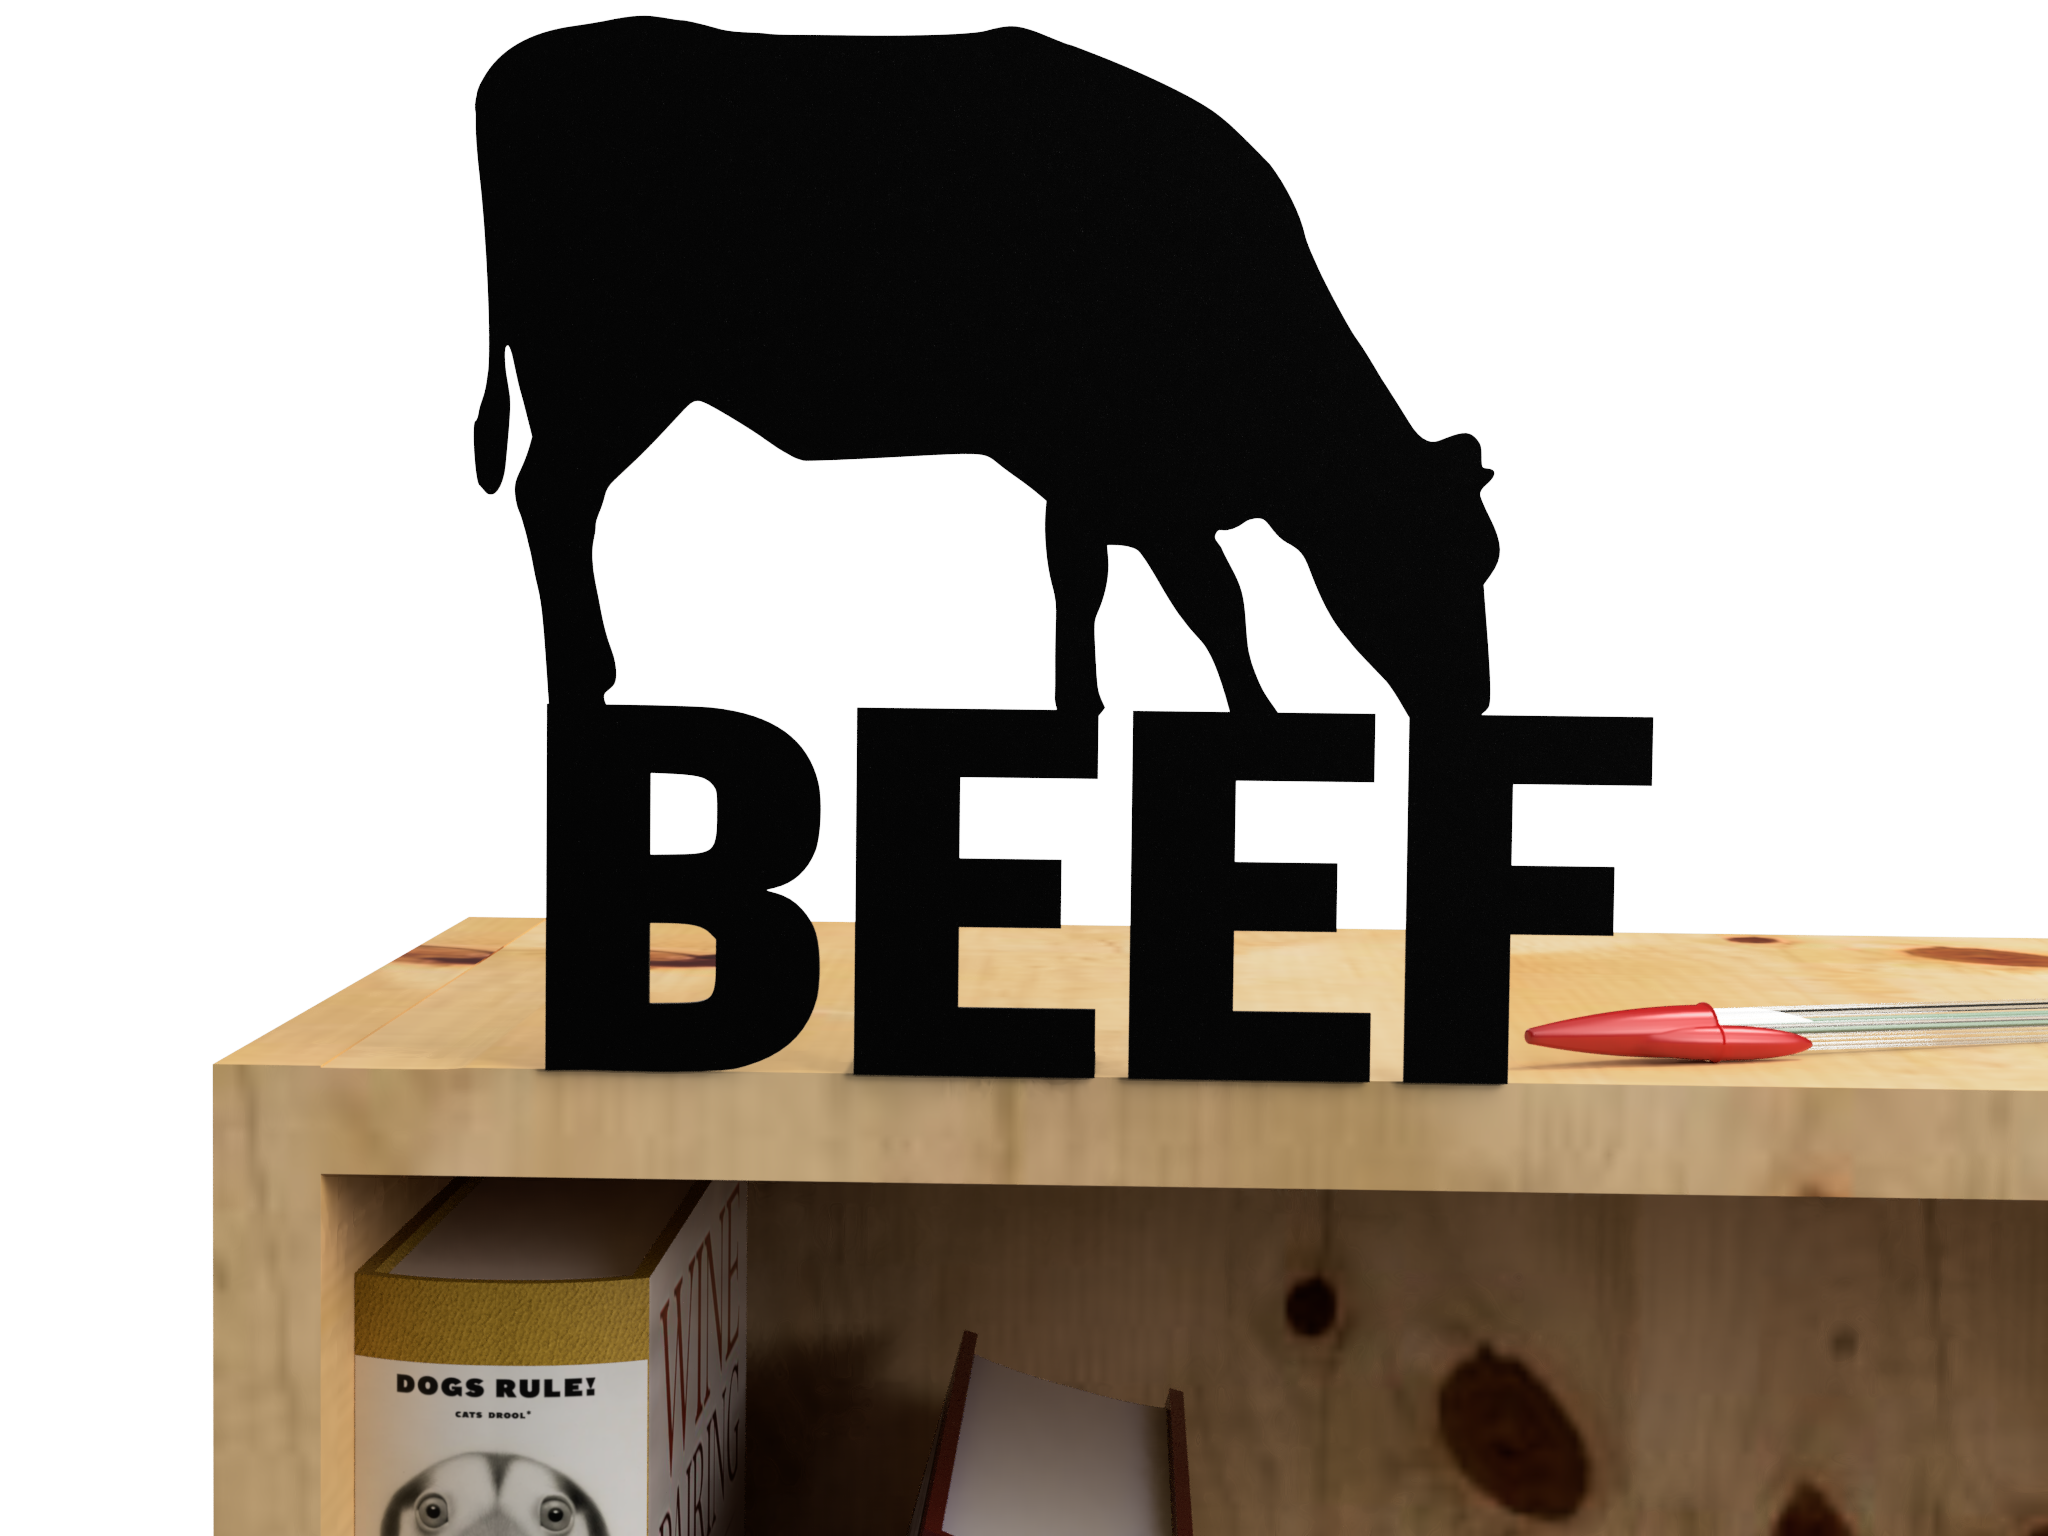 Beef sign